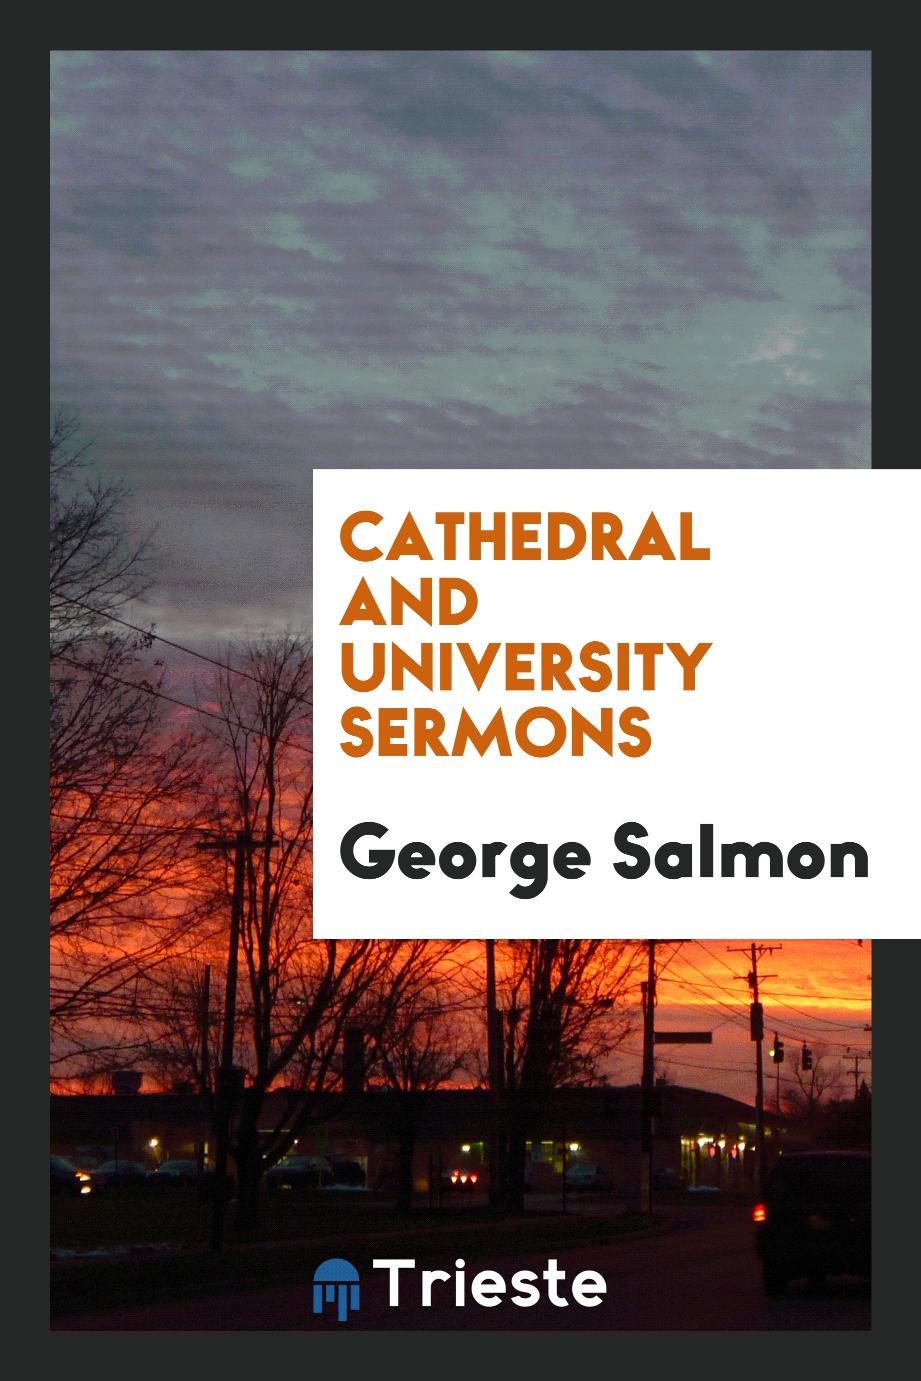 Cathedral and University sermons